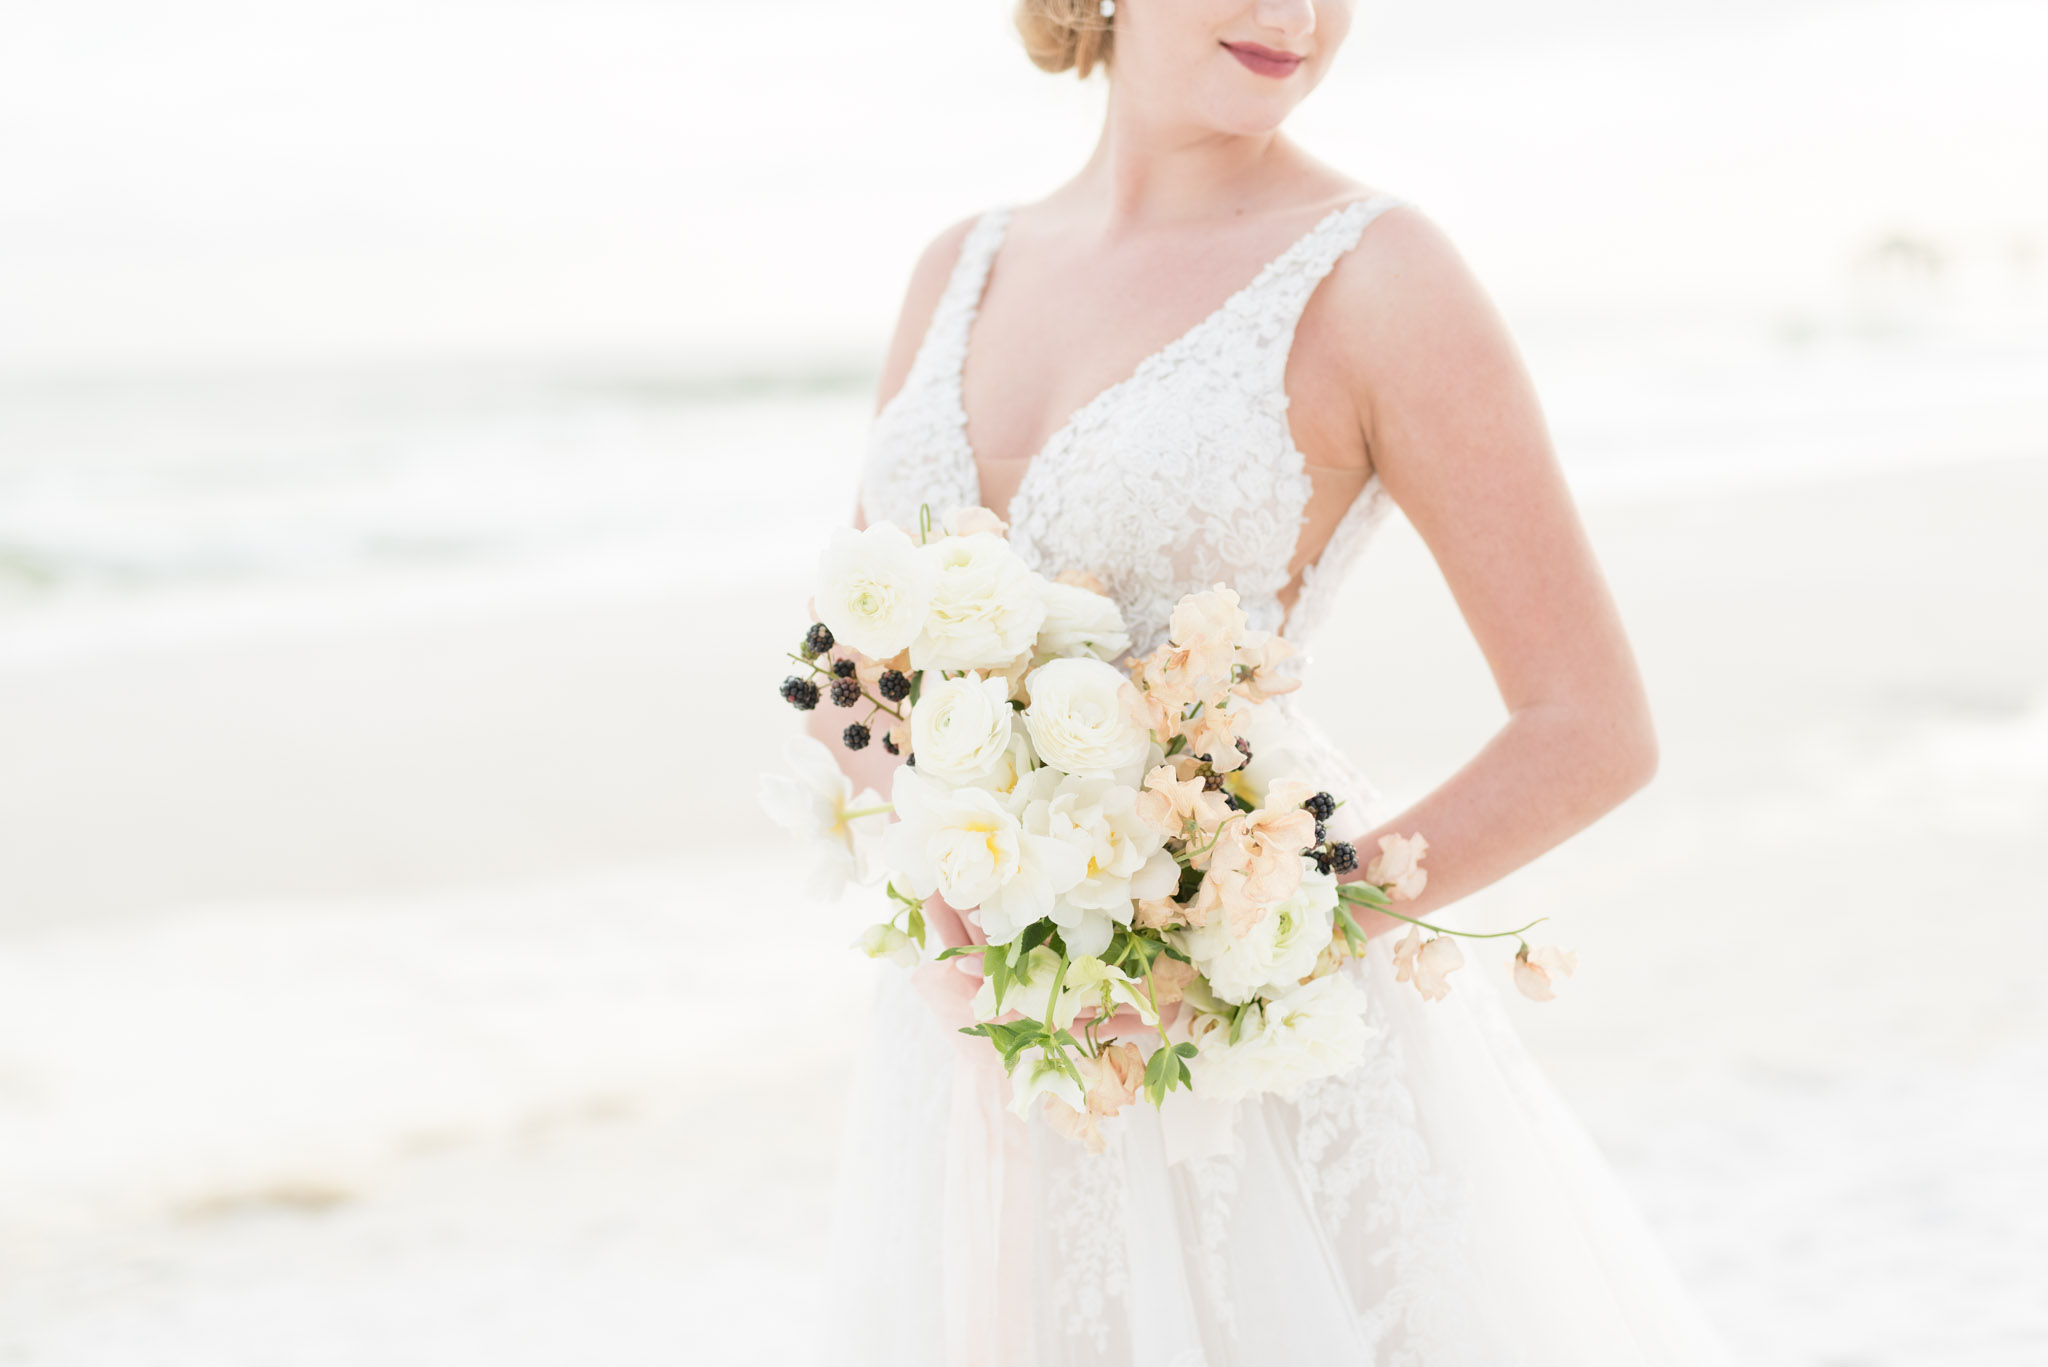 Bride holds bouquet by ocean at sunset.